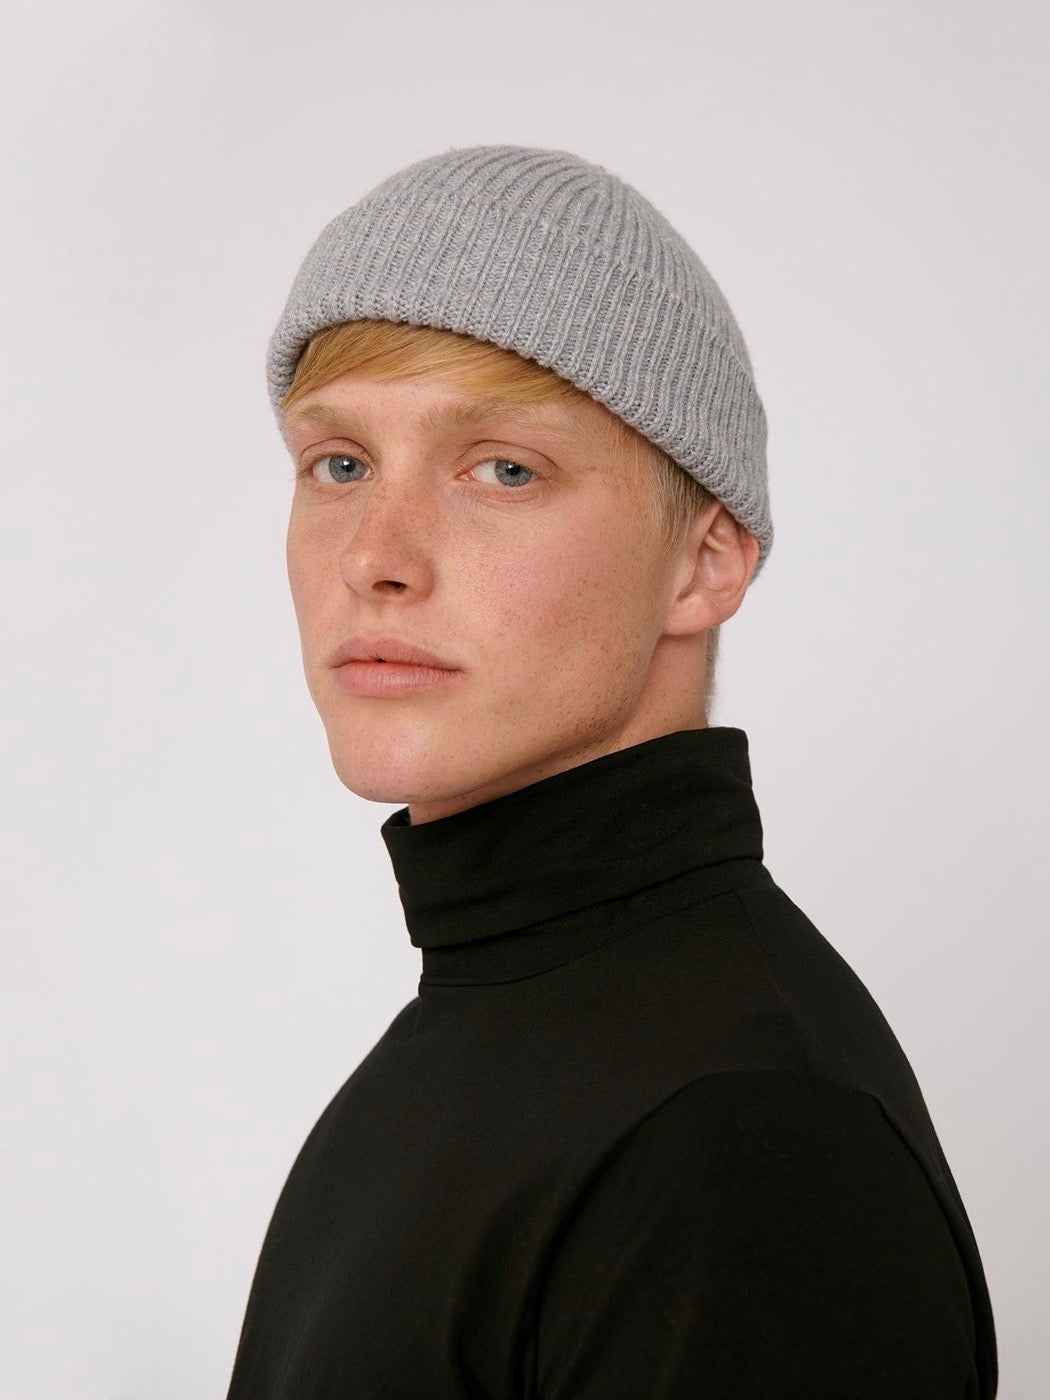 A man in a black turtleneck wearing an Organic Basics Recycled Cashmere Beanie - Grey.